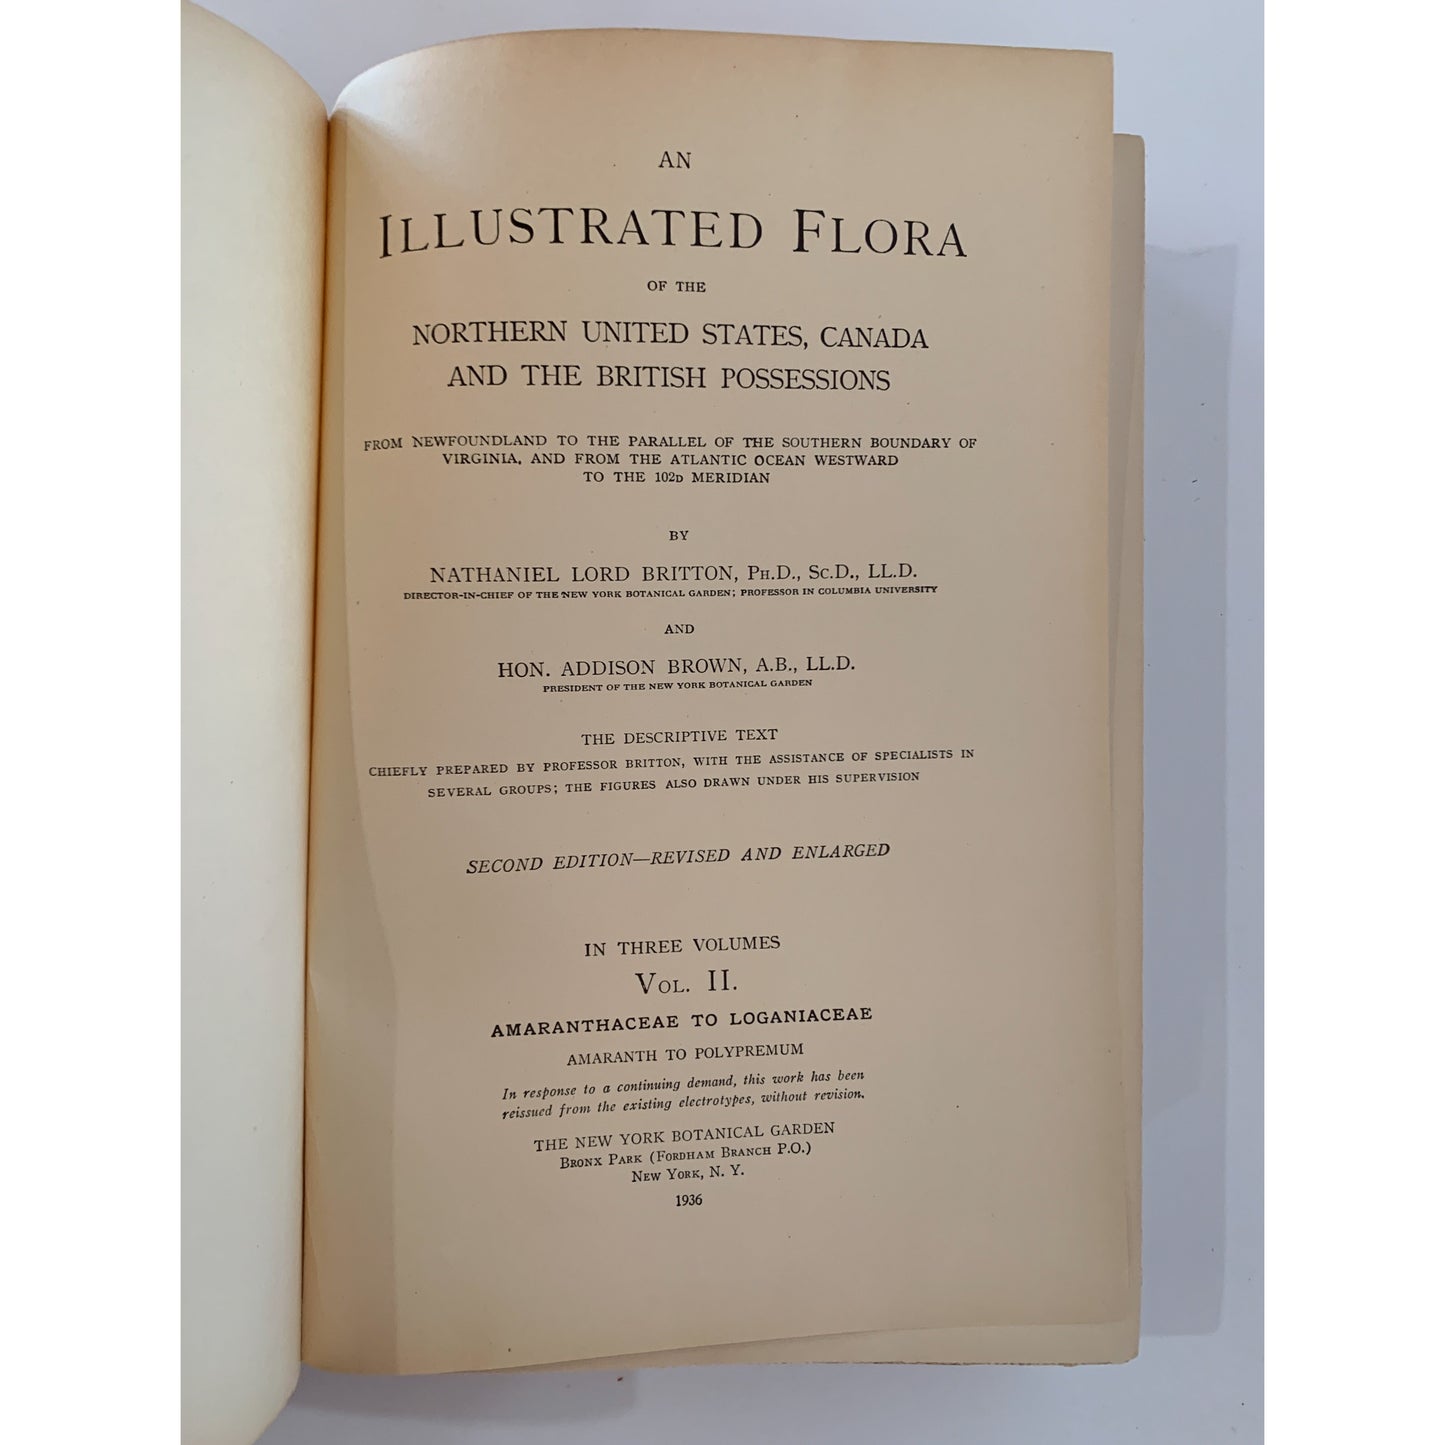 An Illustrated Flora of the United States, Canada, and the British Possessions, 1936